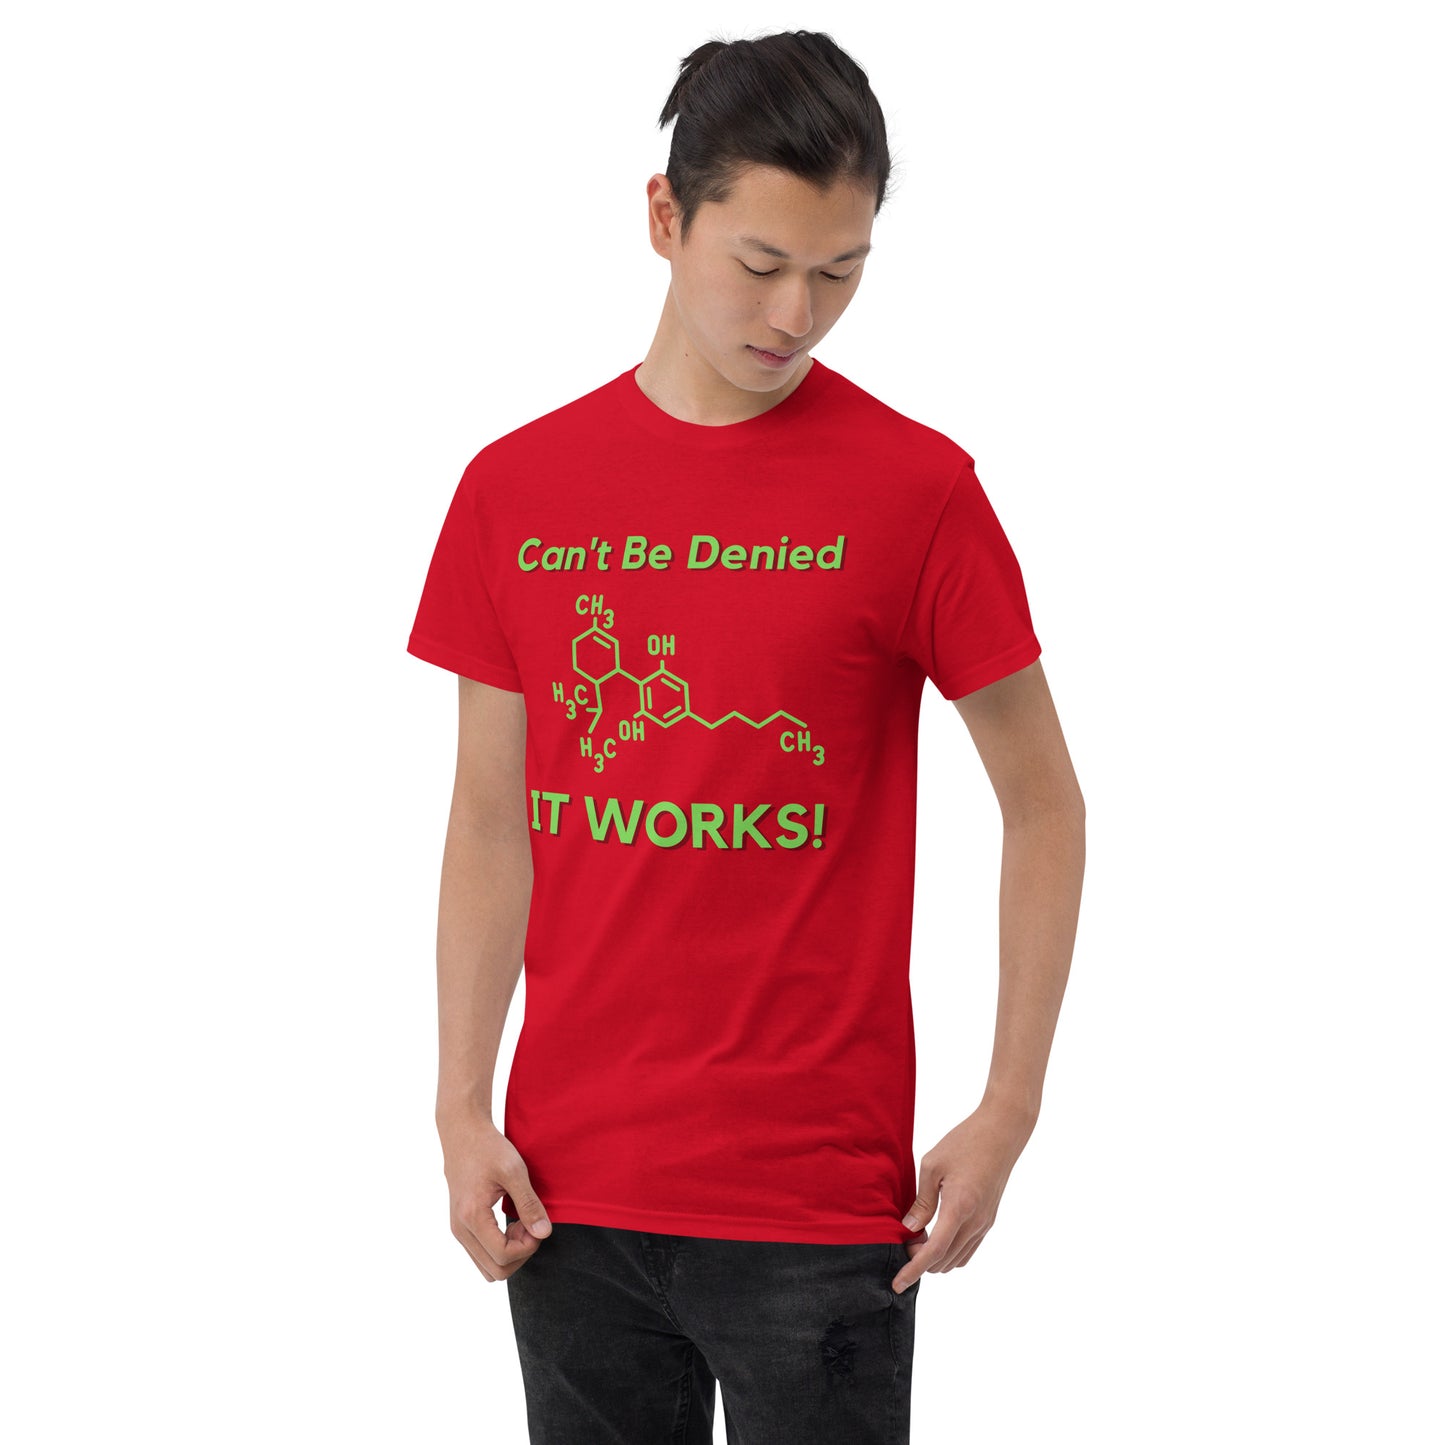 Can't Be Denied It Works! T-Shirt